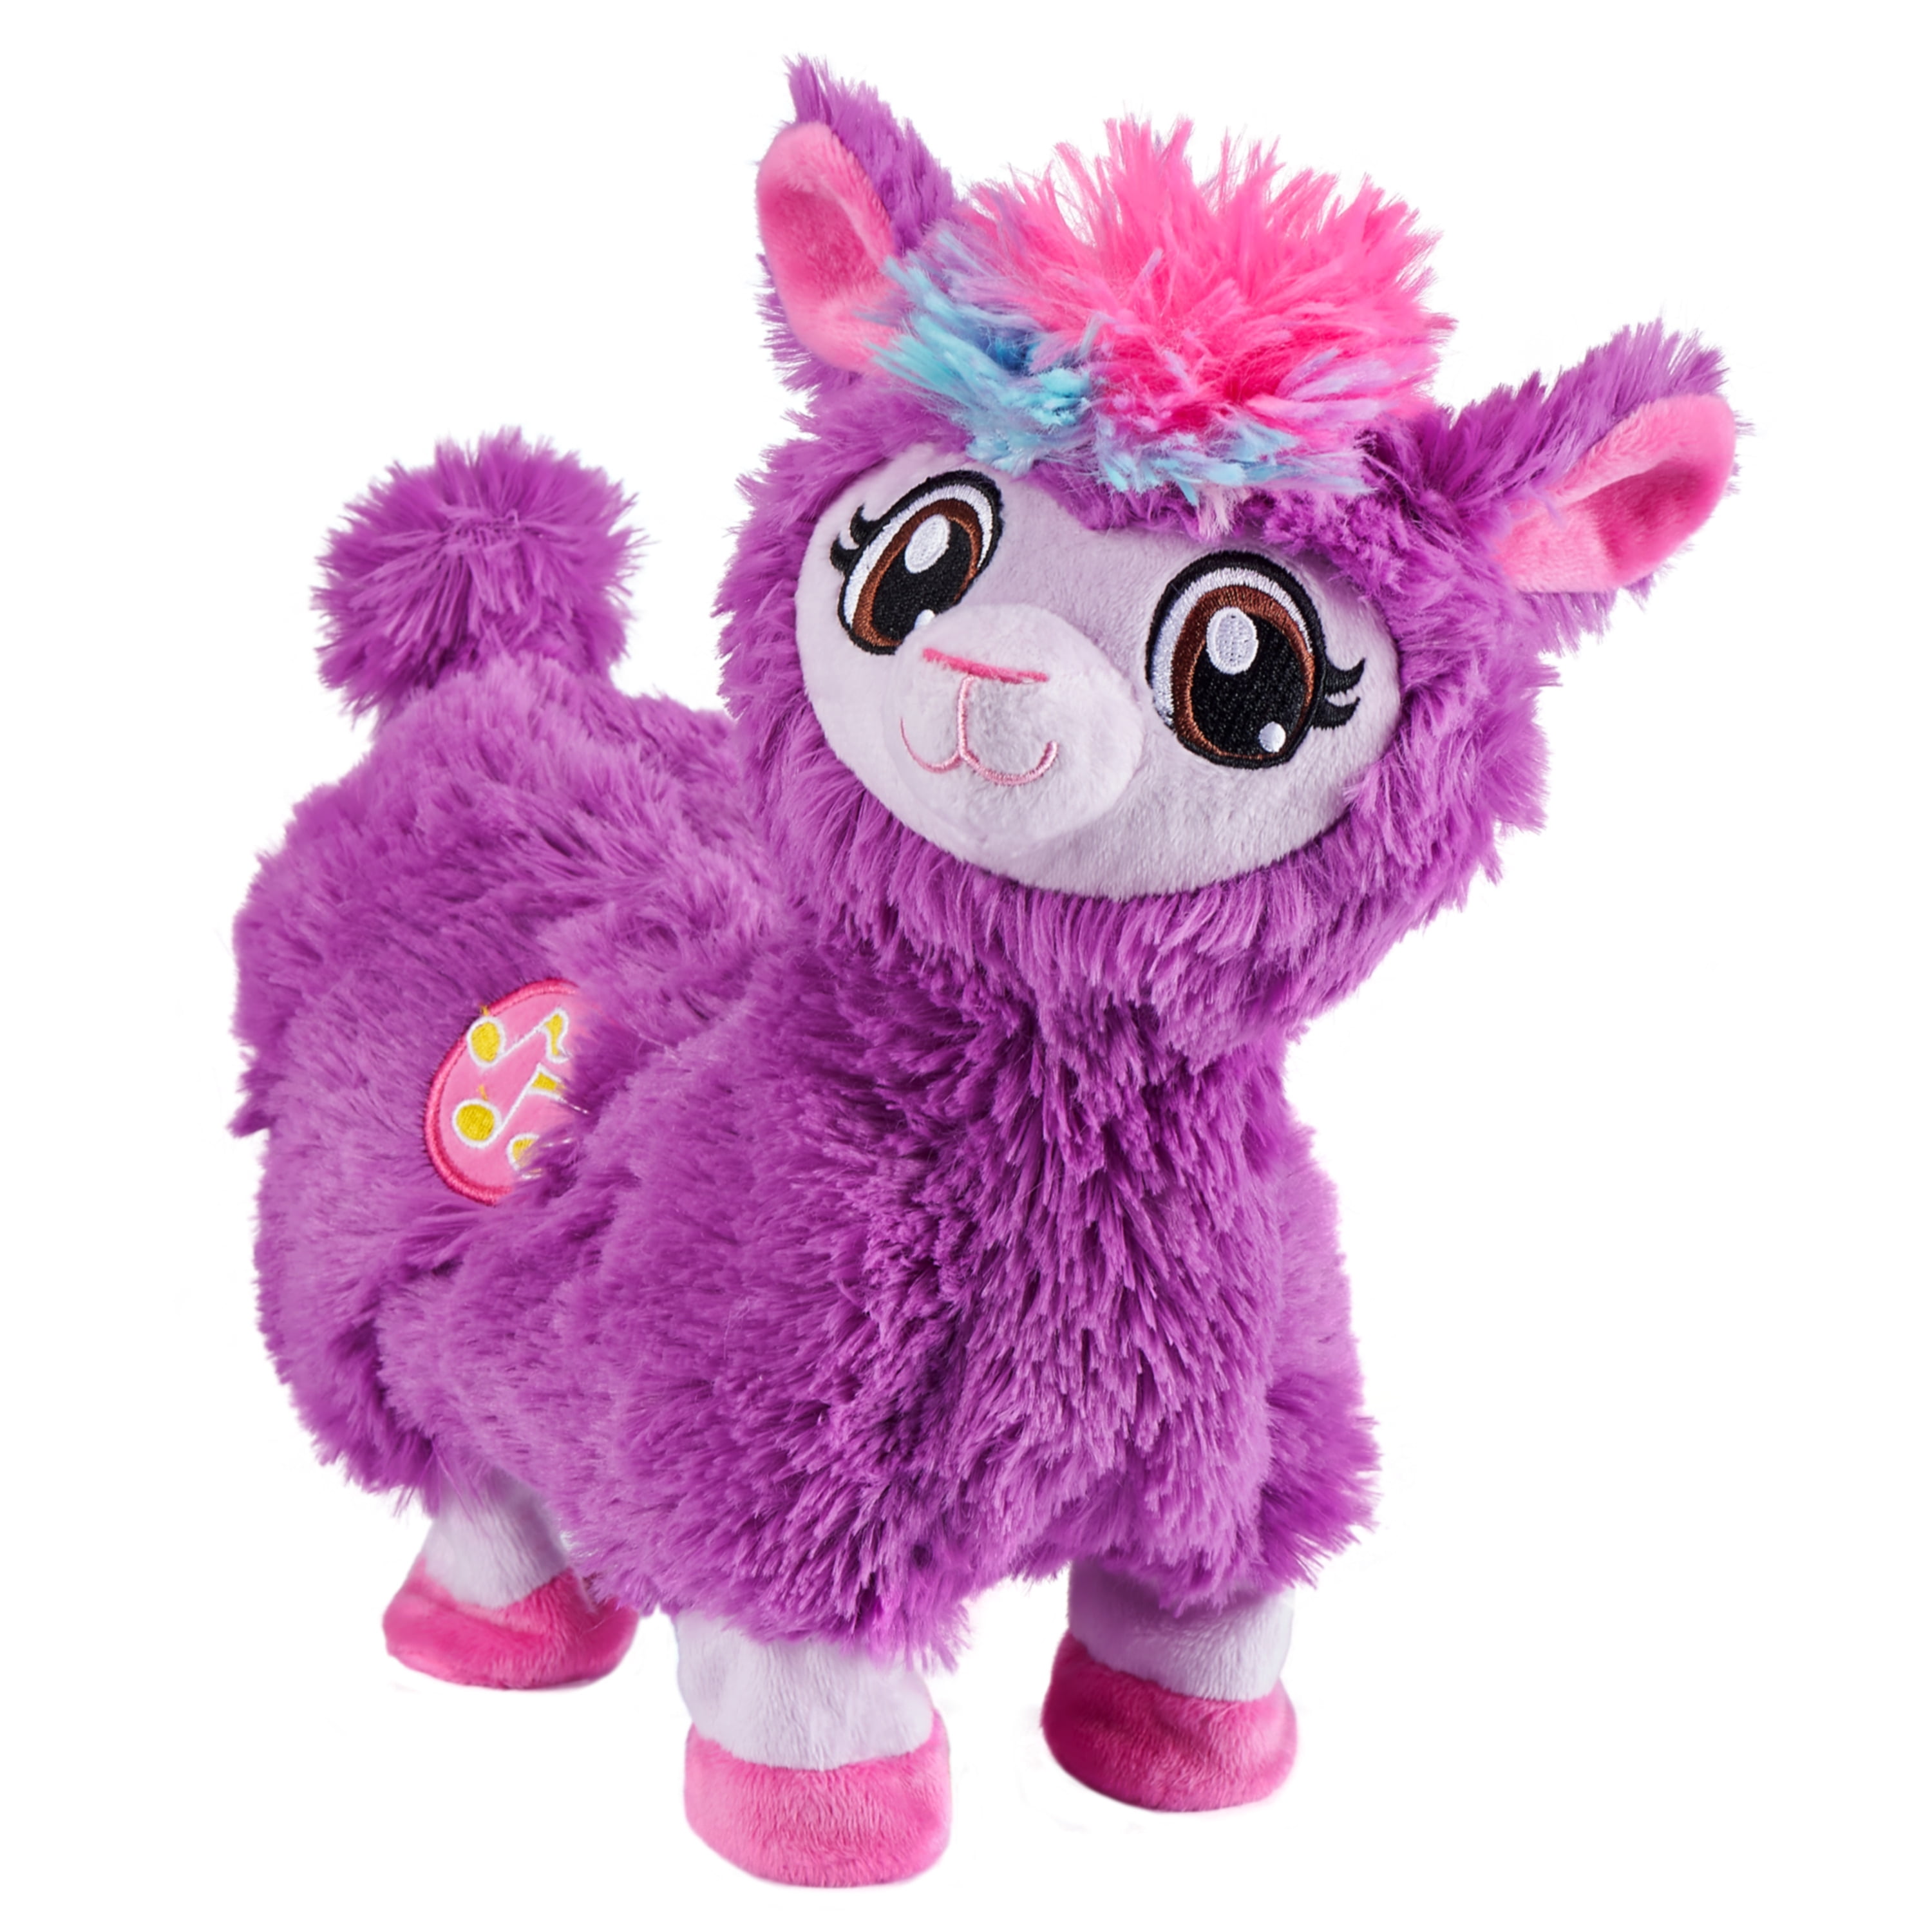 Pets Alive Boppi The Booty Shakin Llama Battery-Powered Dancing Robotic Toy by Zuru 